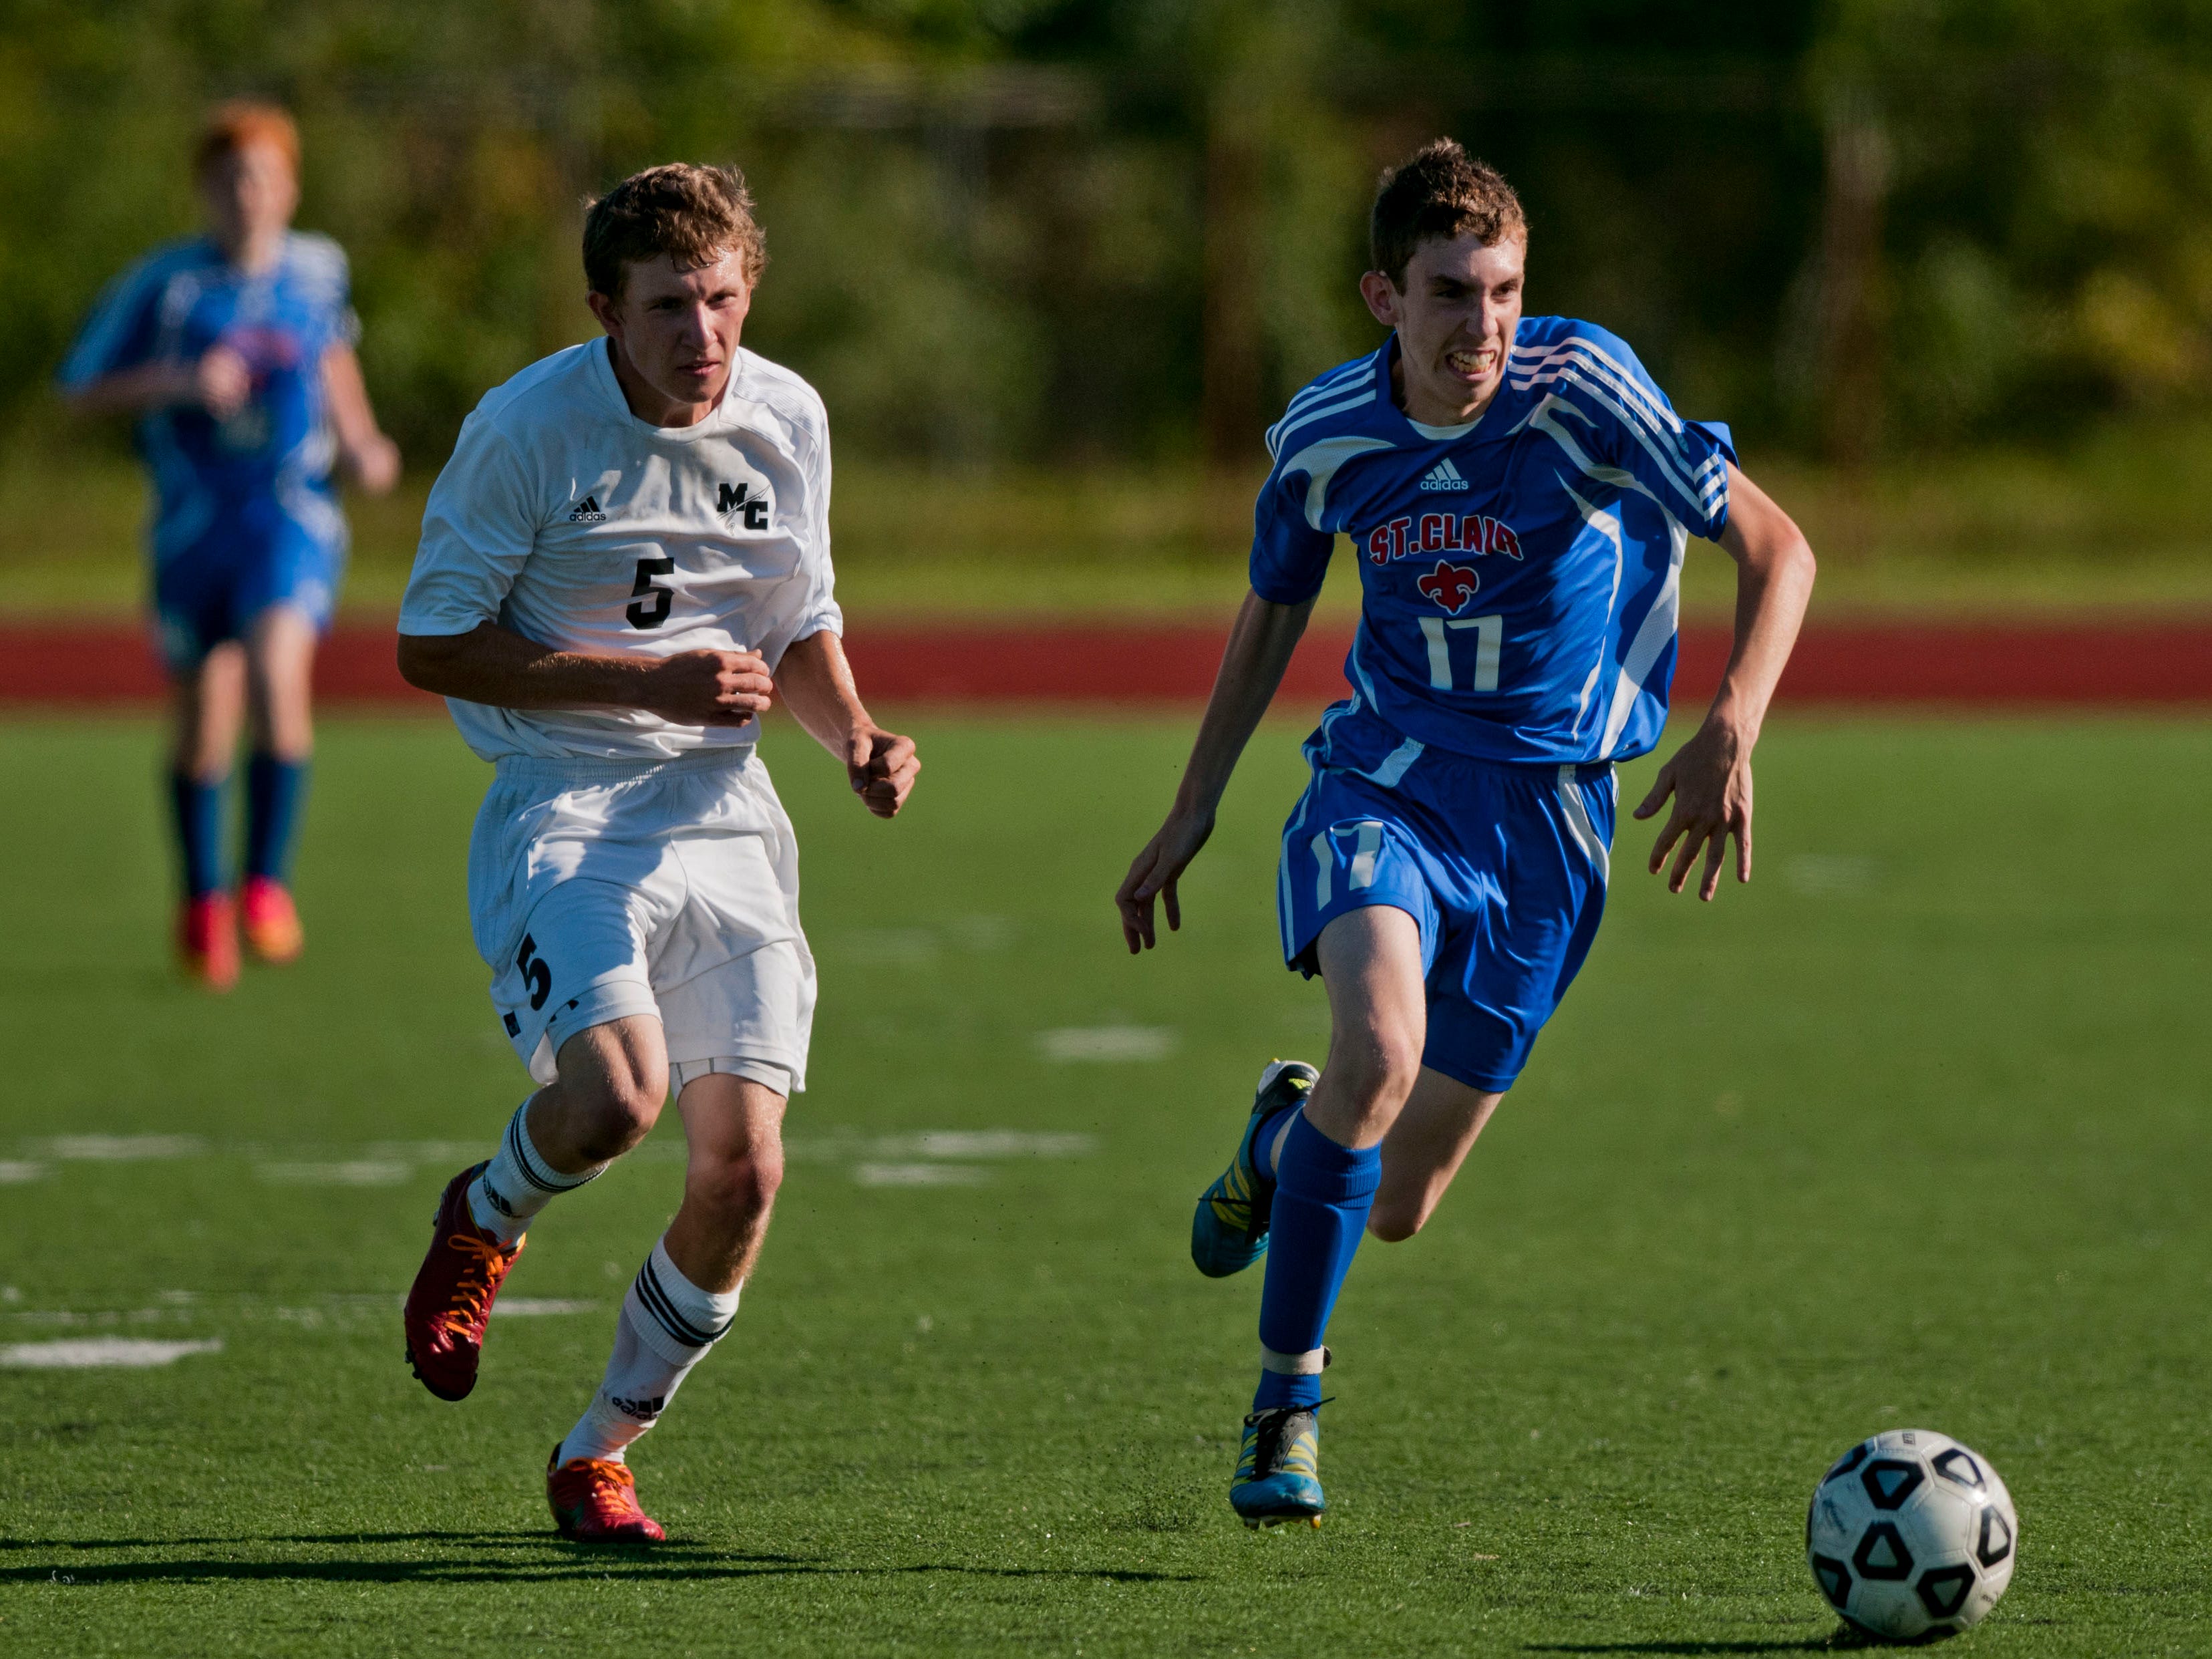 St. Clair senior Chris McCollum drives the ball down field as Marine City senior Billy Wesler chases during a soccer game August 27, 2014 at East China Stadium.